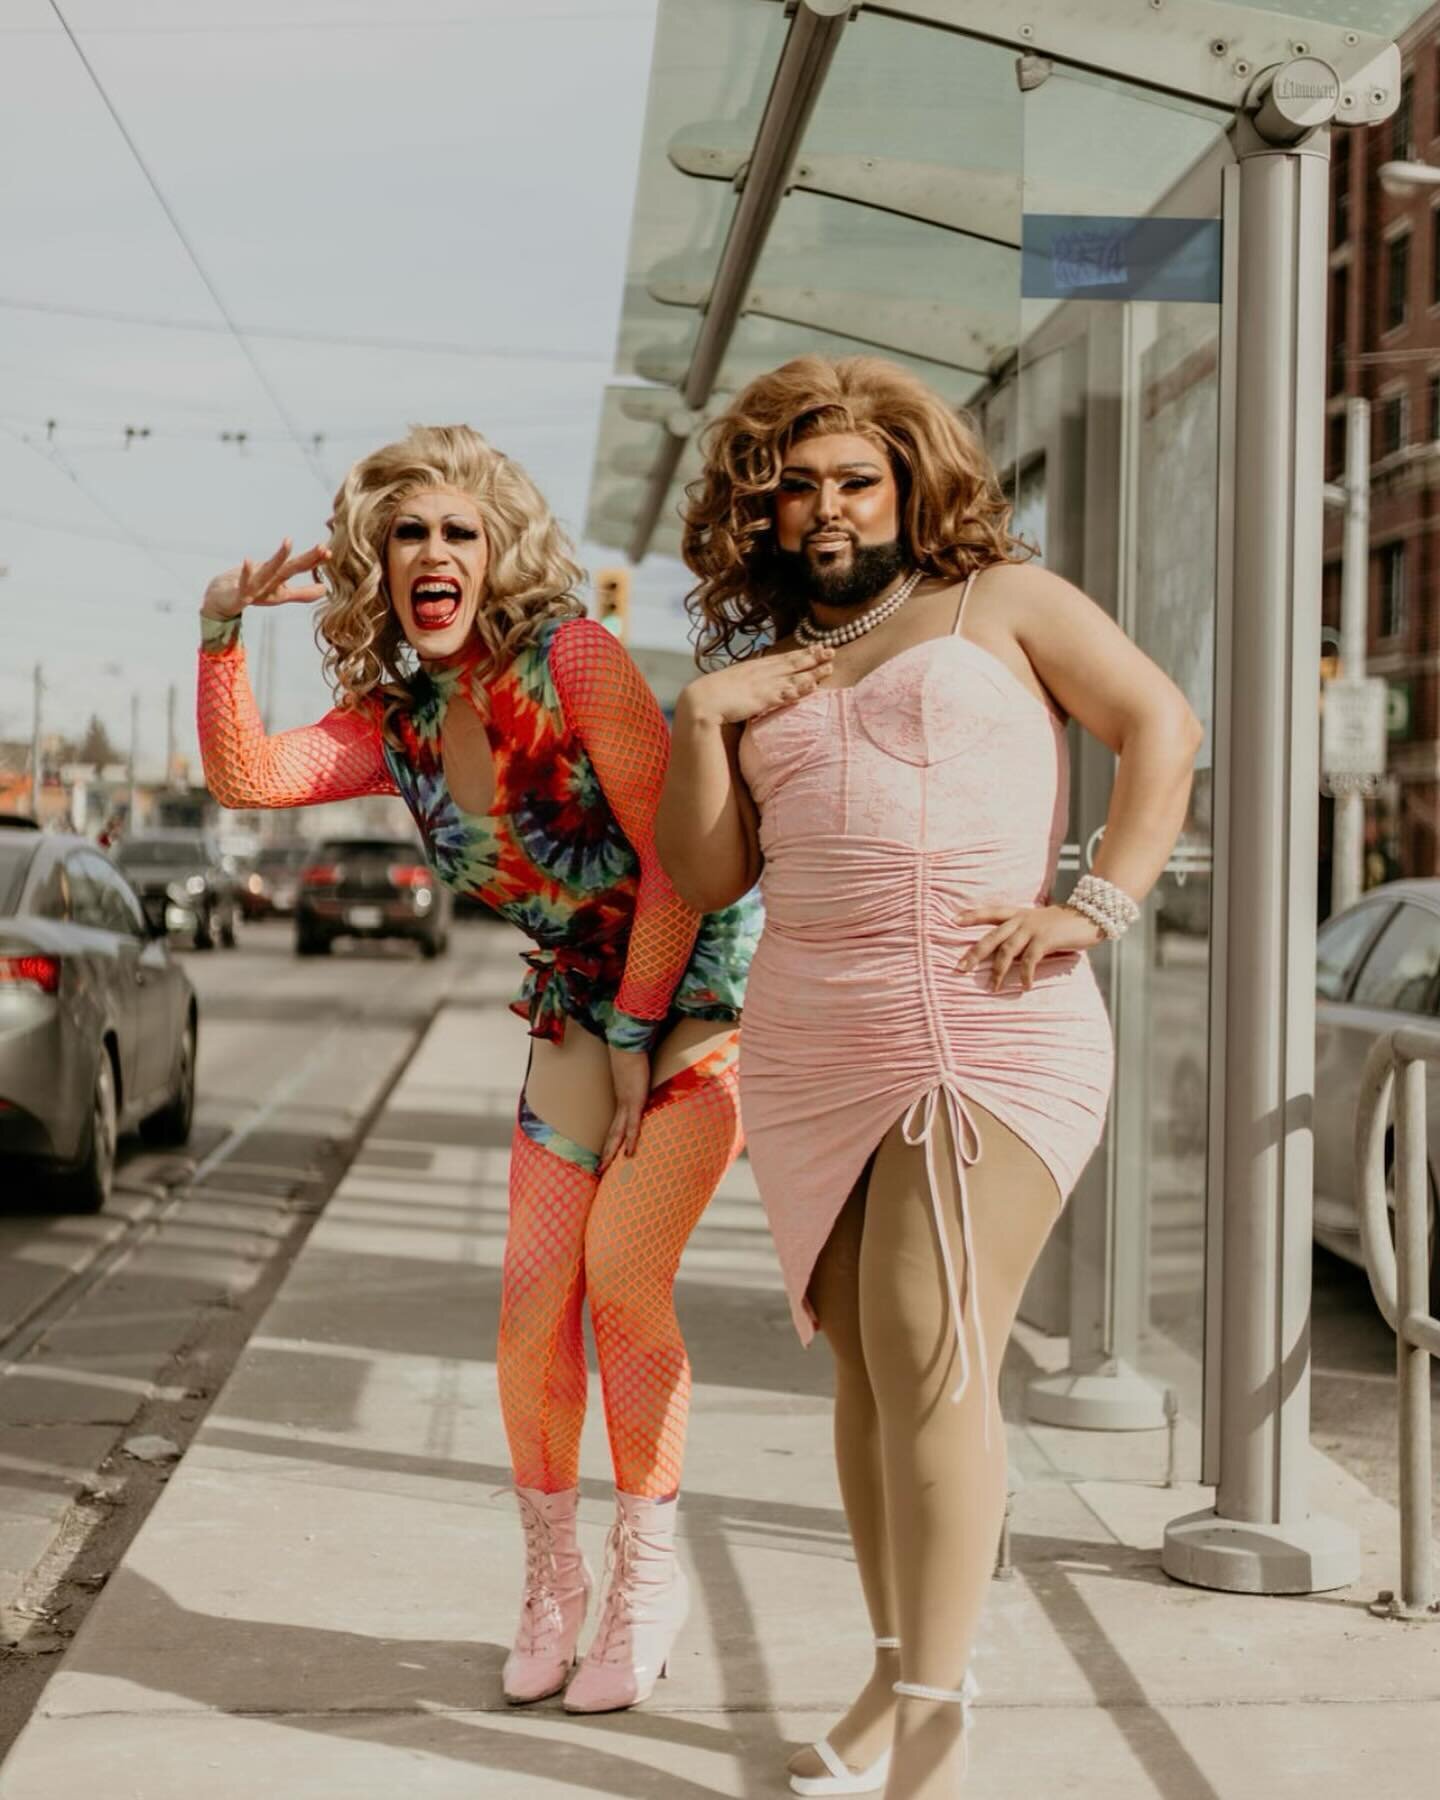 Is the bus still running?  @madeelovegood and @messymargaretqueen needed a ride after slaying brunch on Feb 25!  They eventually got a ride after Madee&rsquo;s shoe broke and Messy used her gums to flag down a broken city bus. 

Don&rsquo;t miss the 